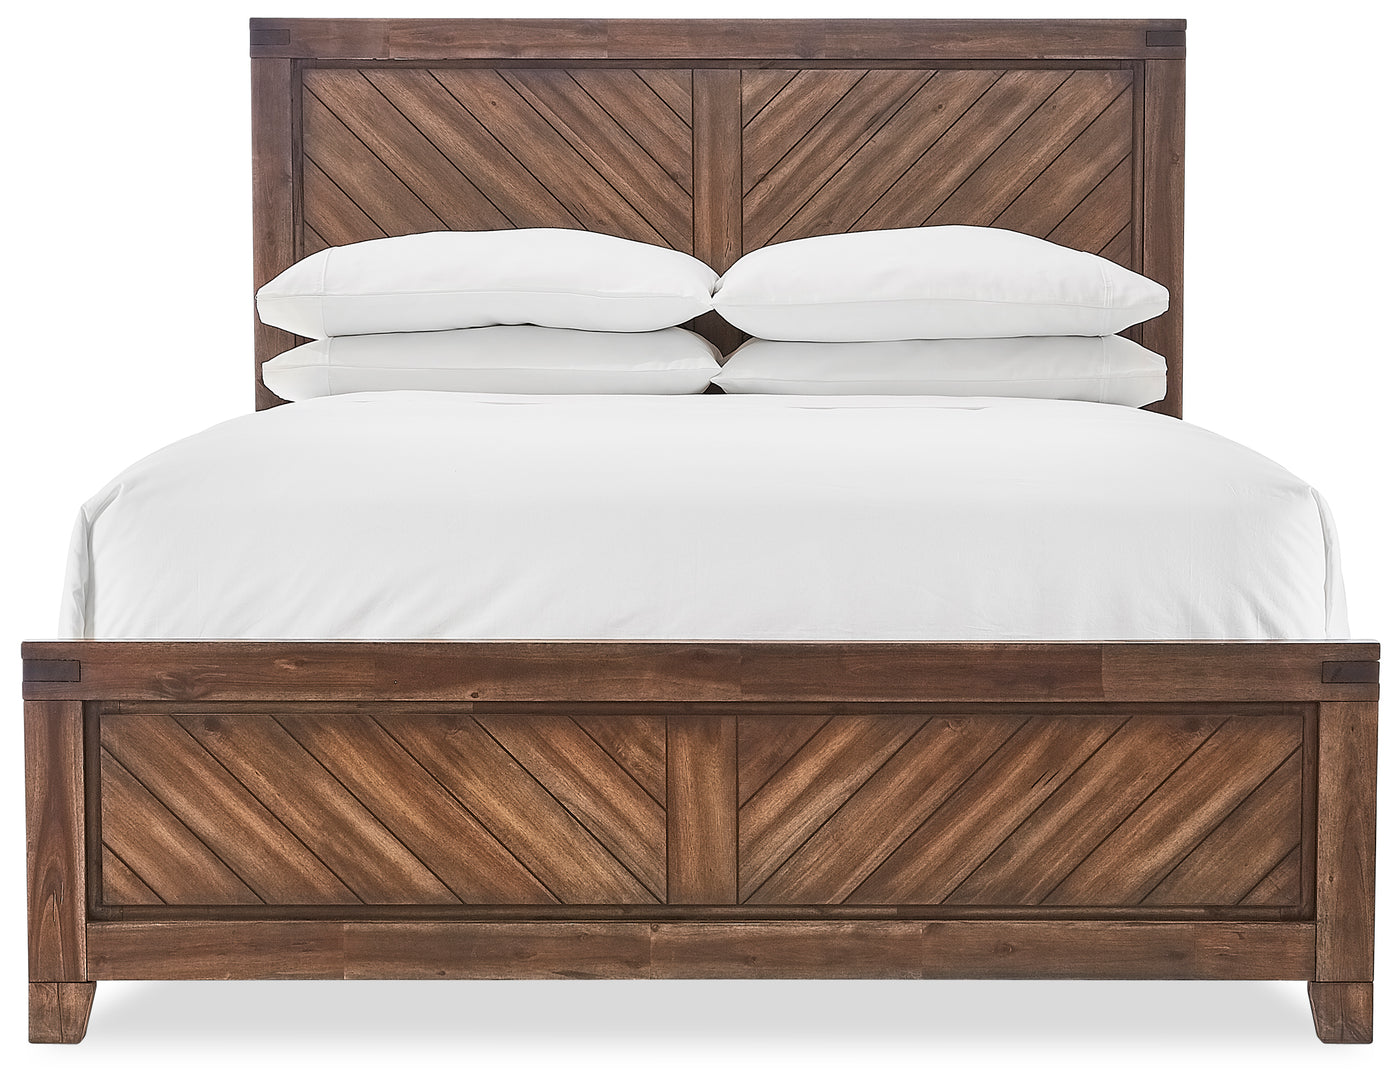 Nathan 3-Piece Queen Bed - Brown